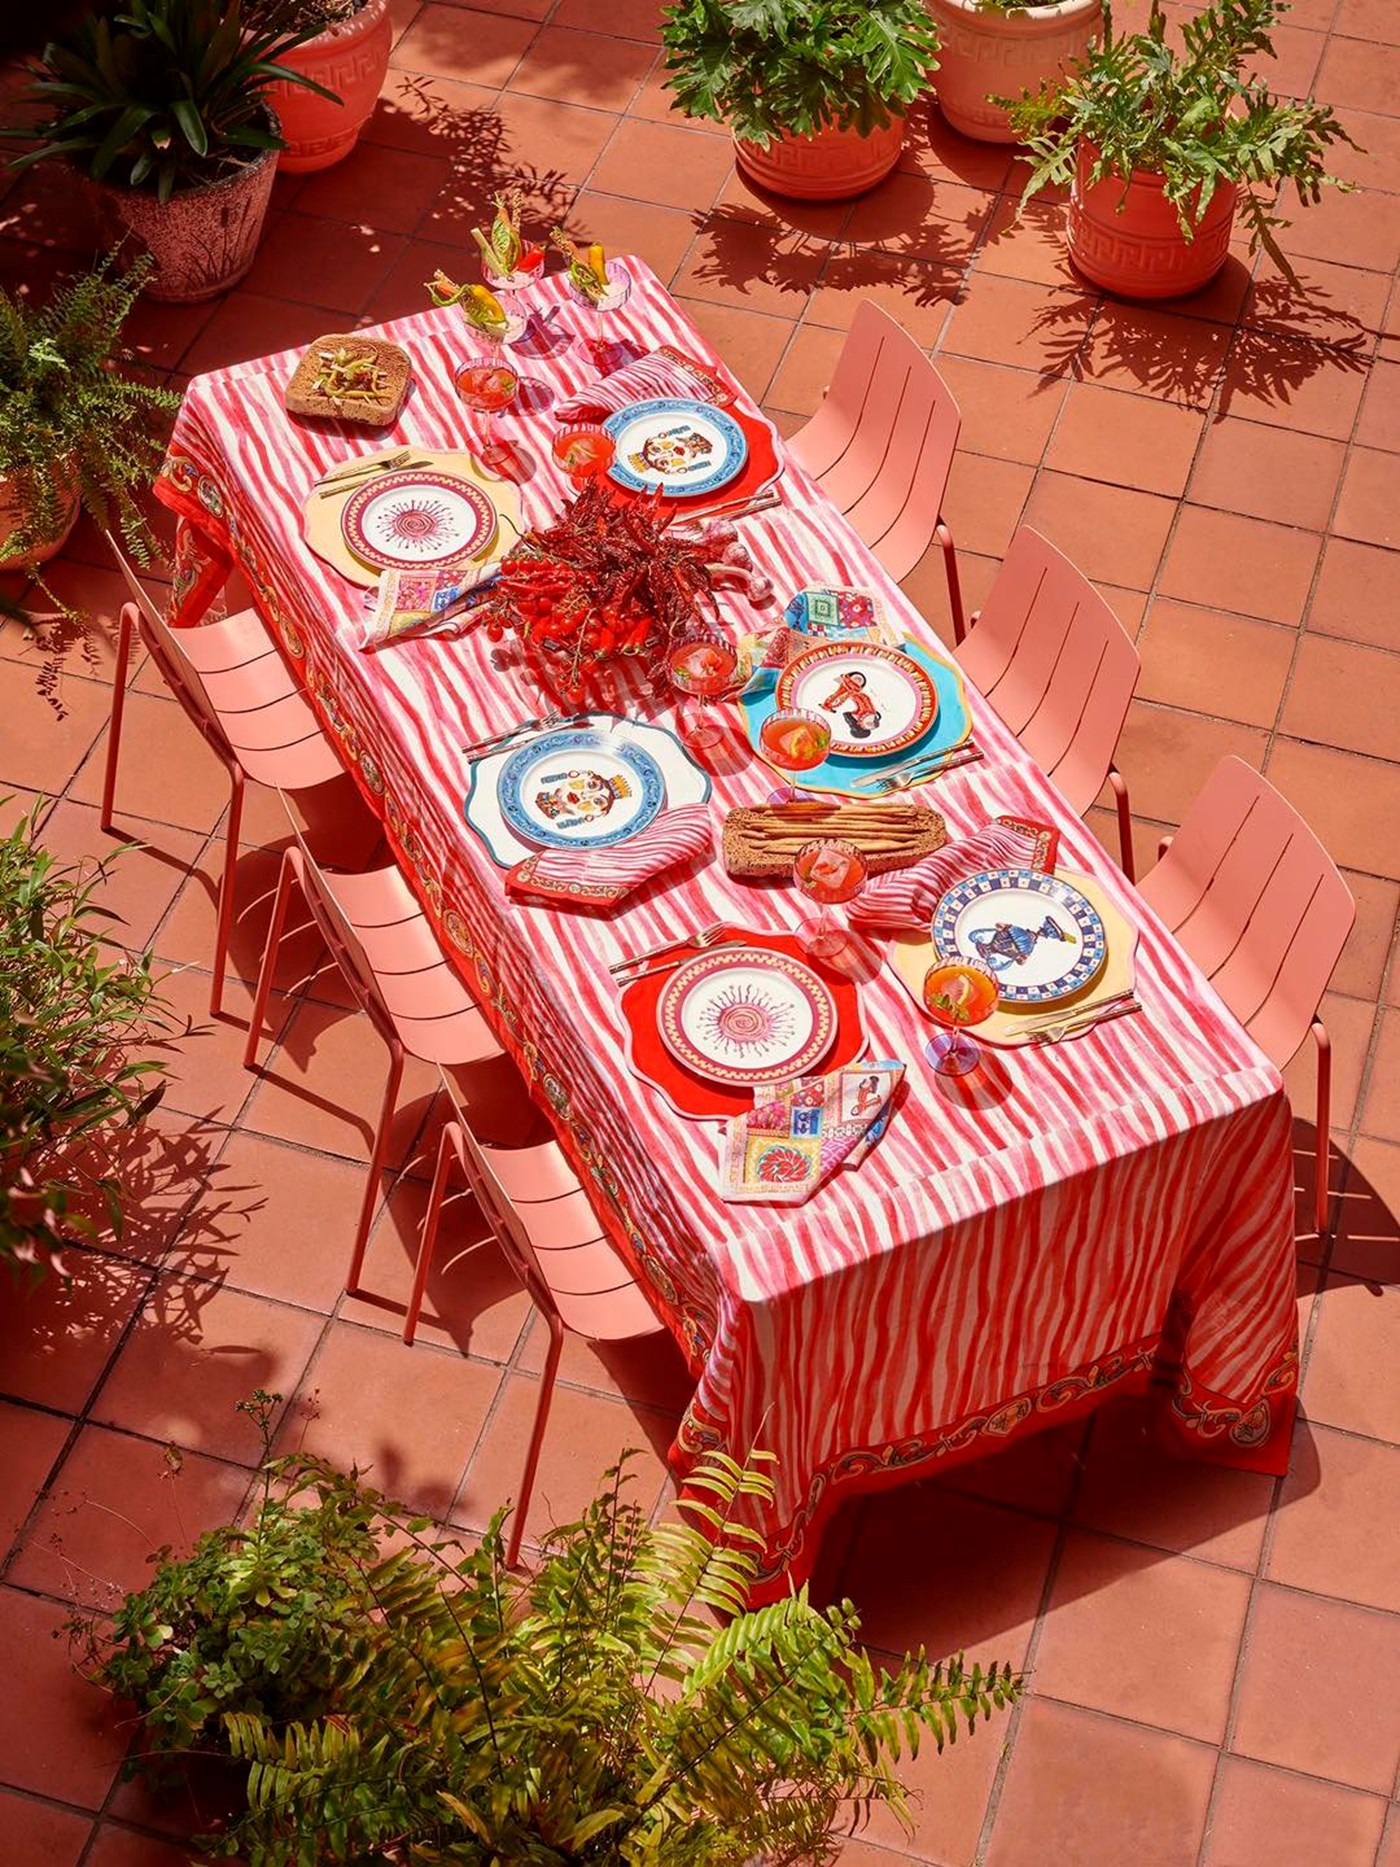 A top down view of a colourful set outdoors table complete with red and white table cloth against terracotta floor tiles 